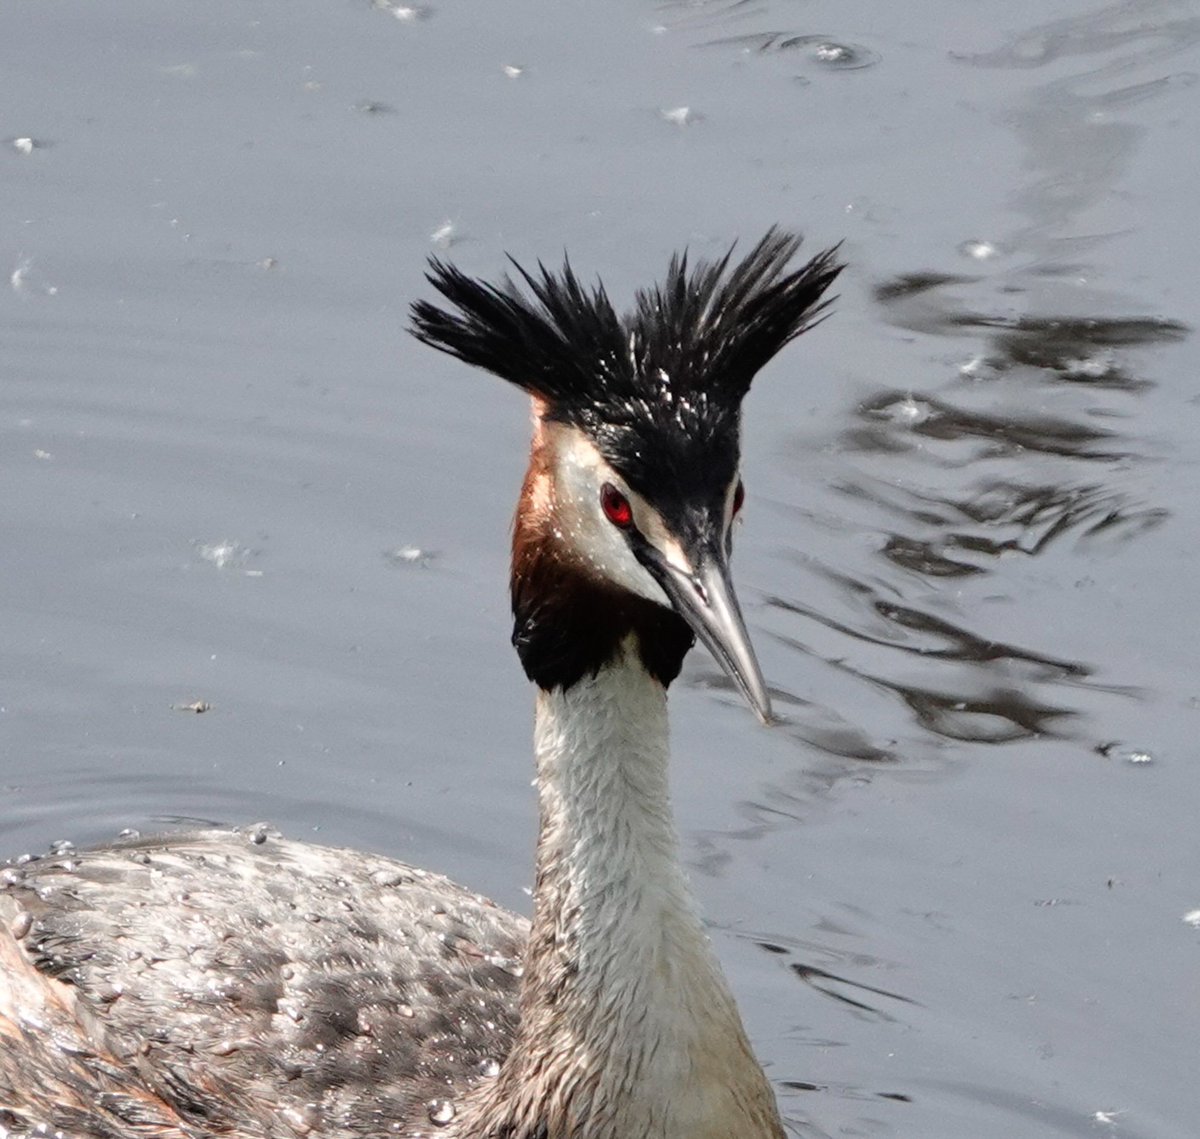 Great crested grebe @AvalonMarshes